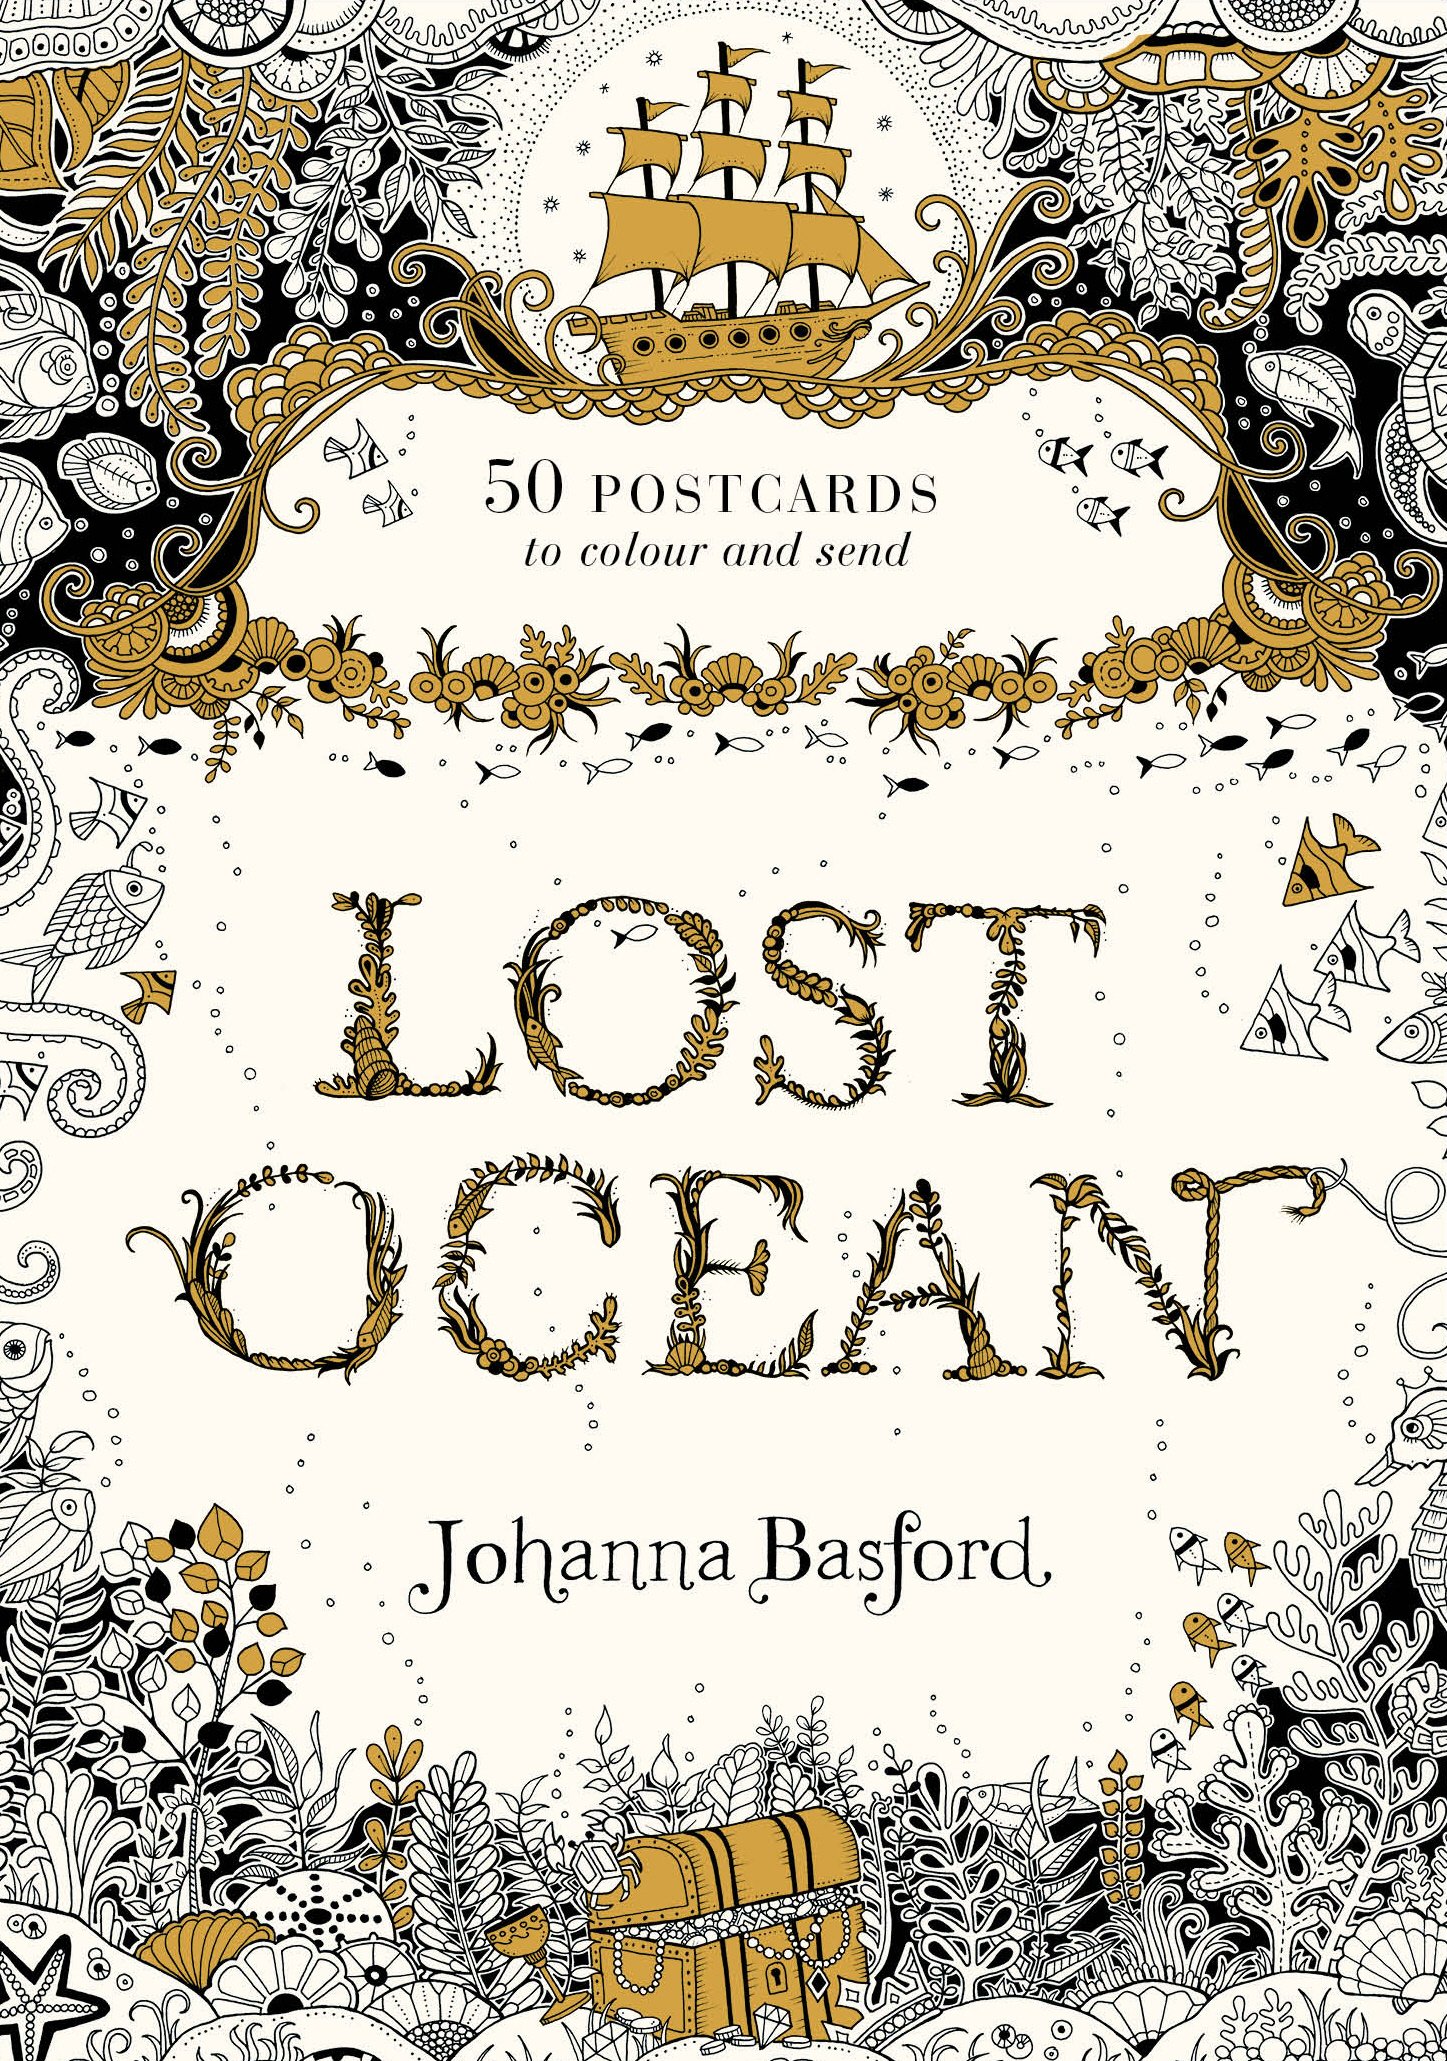 Lost Ocean Postcard Edition: 50 Postcards to Colour and Send